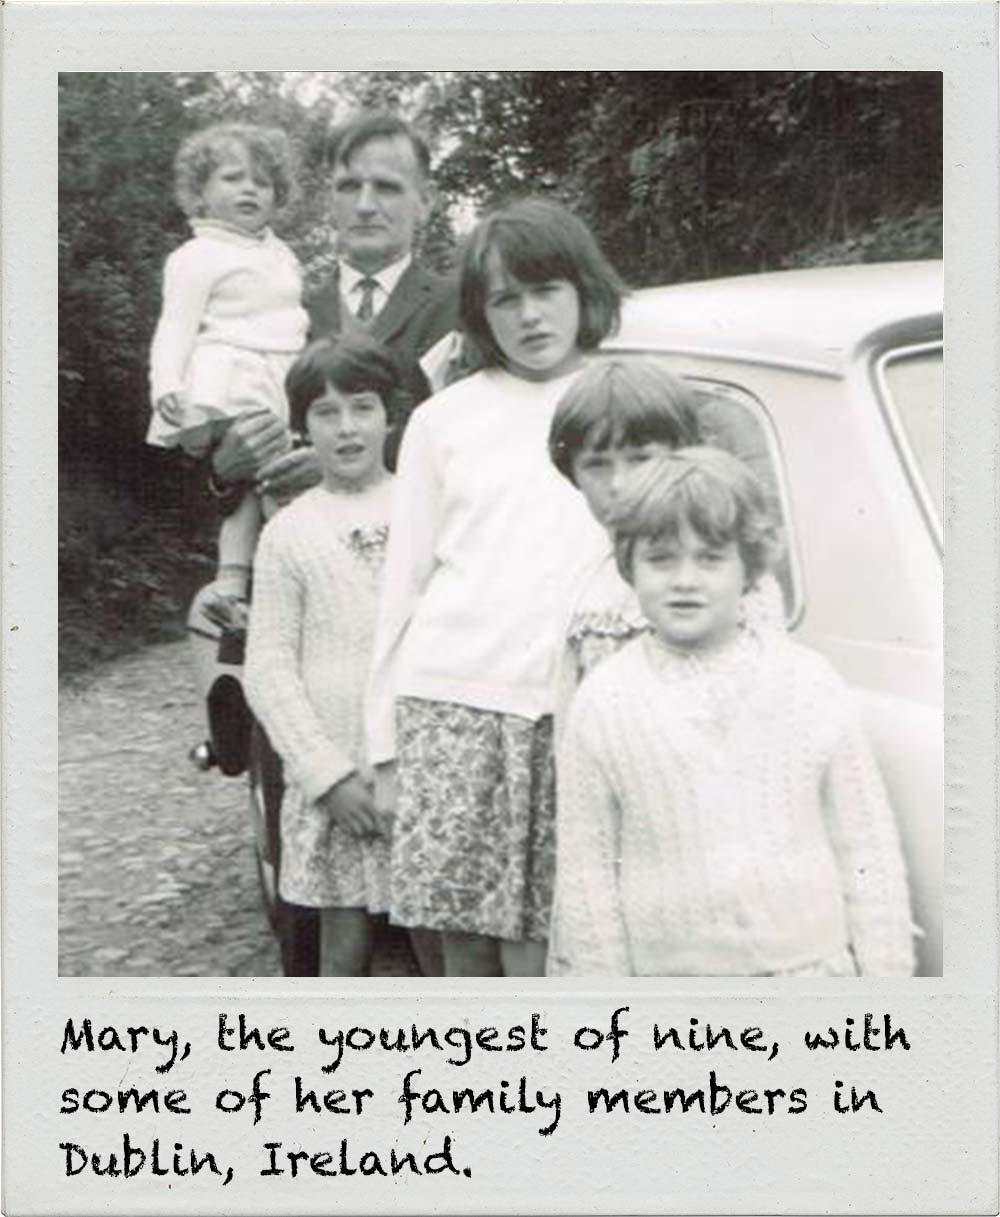 Mary, the youngest of nine, with some of her family members in Dublin, Ireland.